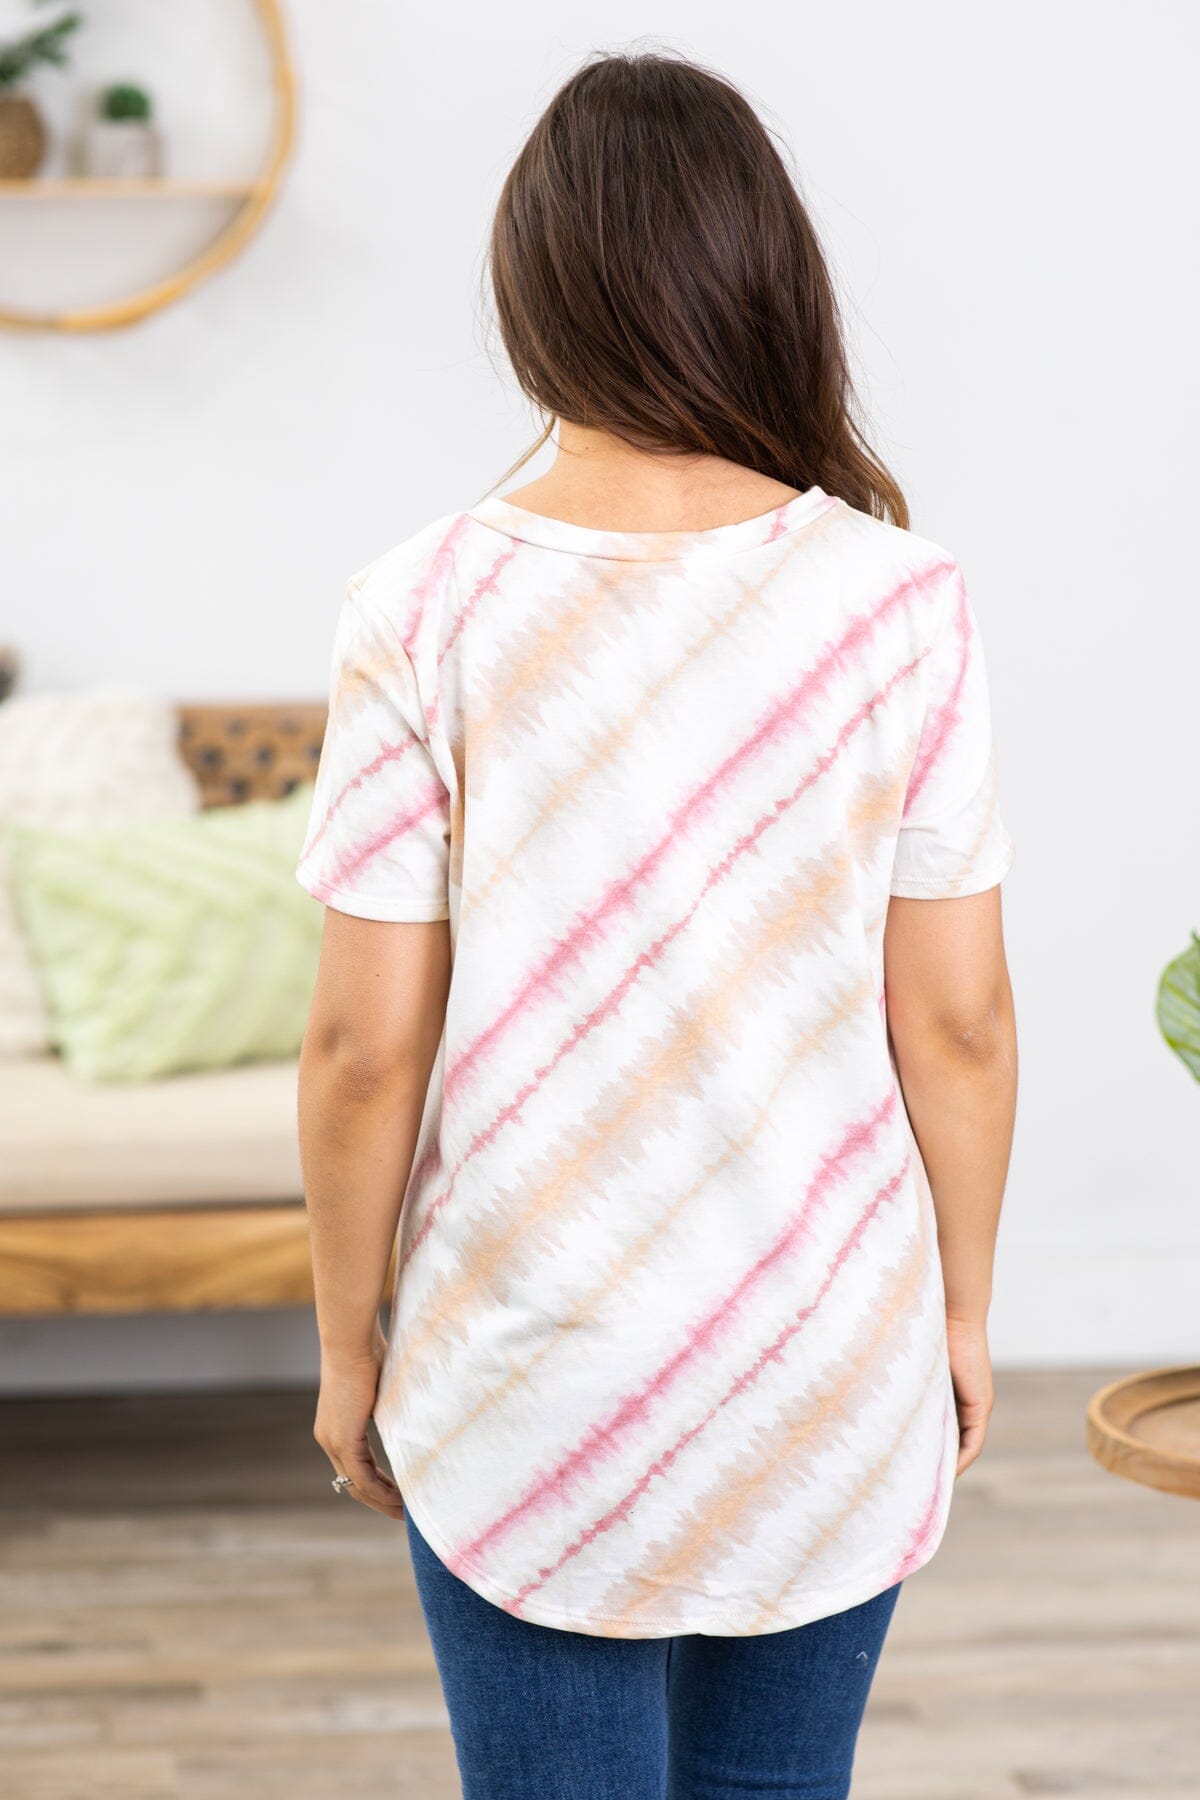 Pink and Tan Stripe Tie Dye Top - Filly Flair